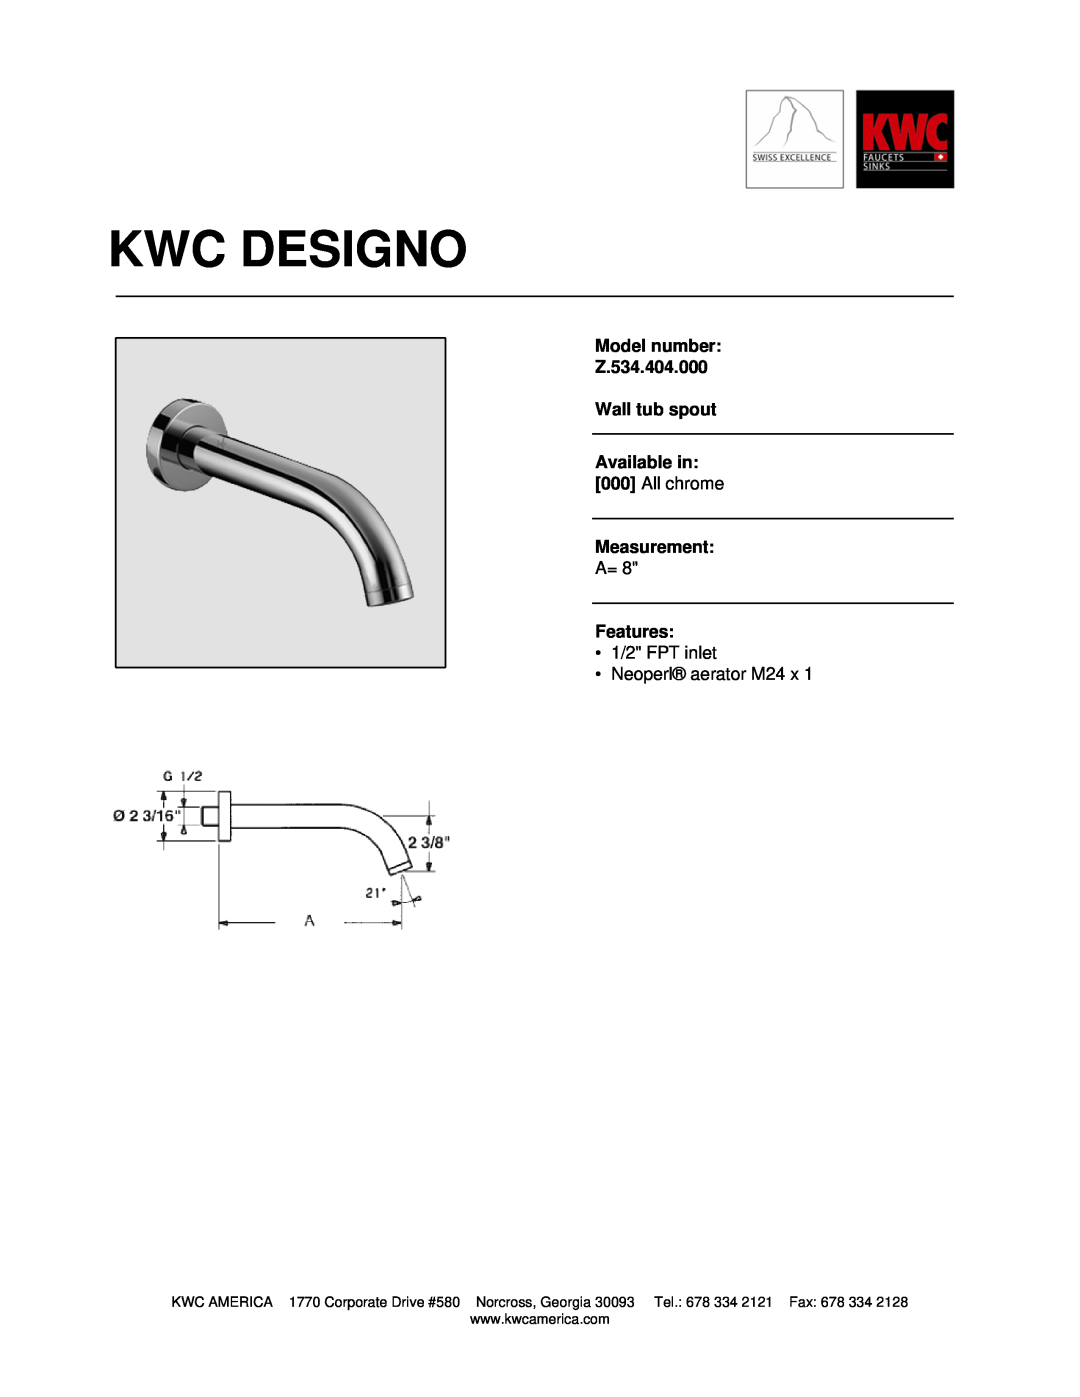 KWC manual Kwc Designo, Model number Z.534.404.000 Wall tub spout, Available in 000 All chrome Measurement, Features 